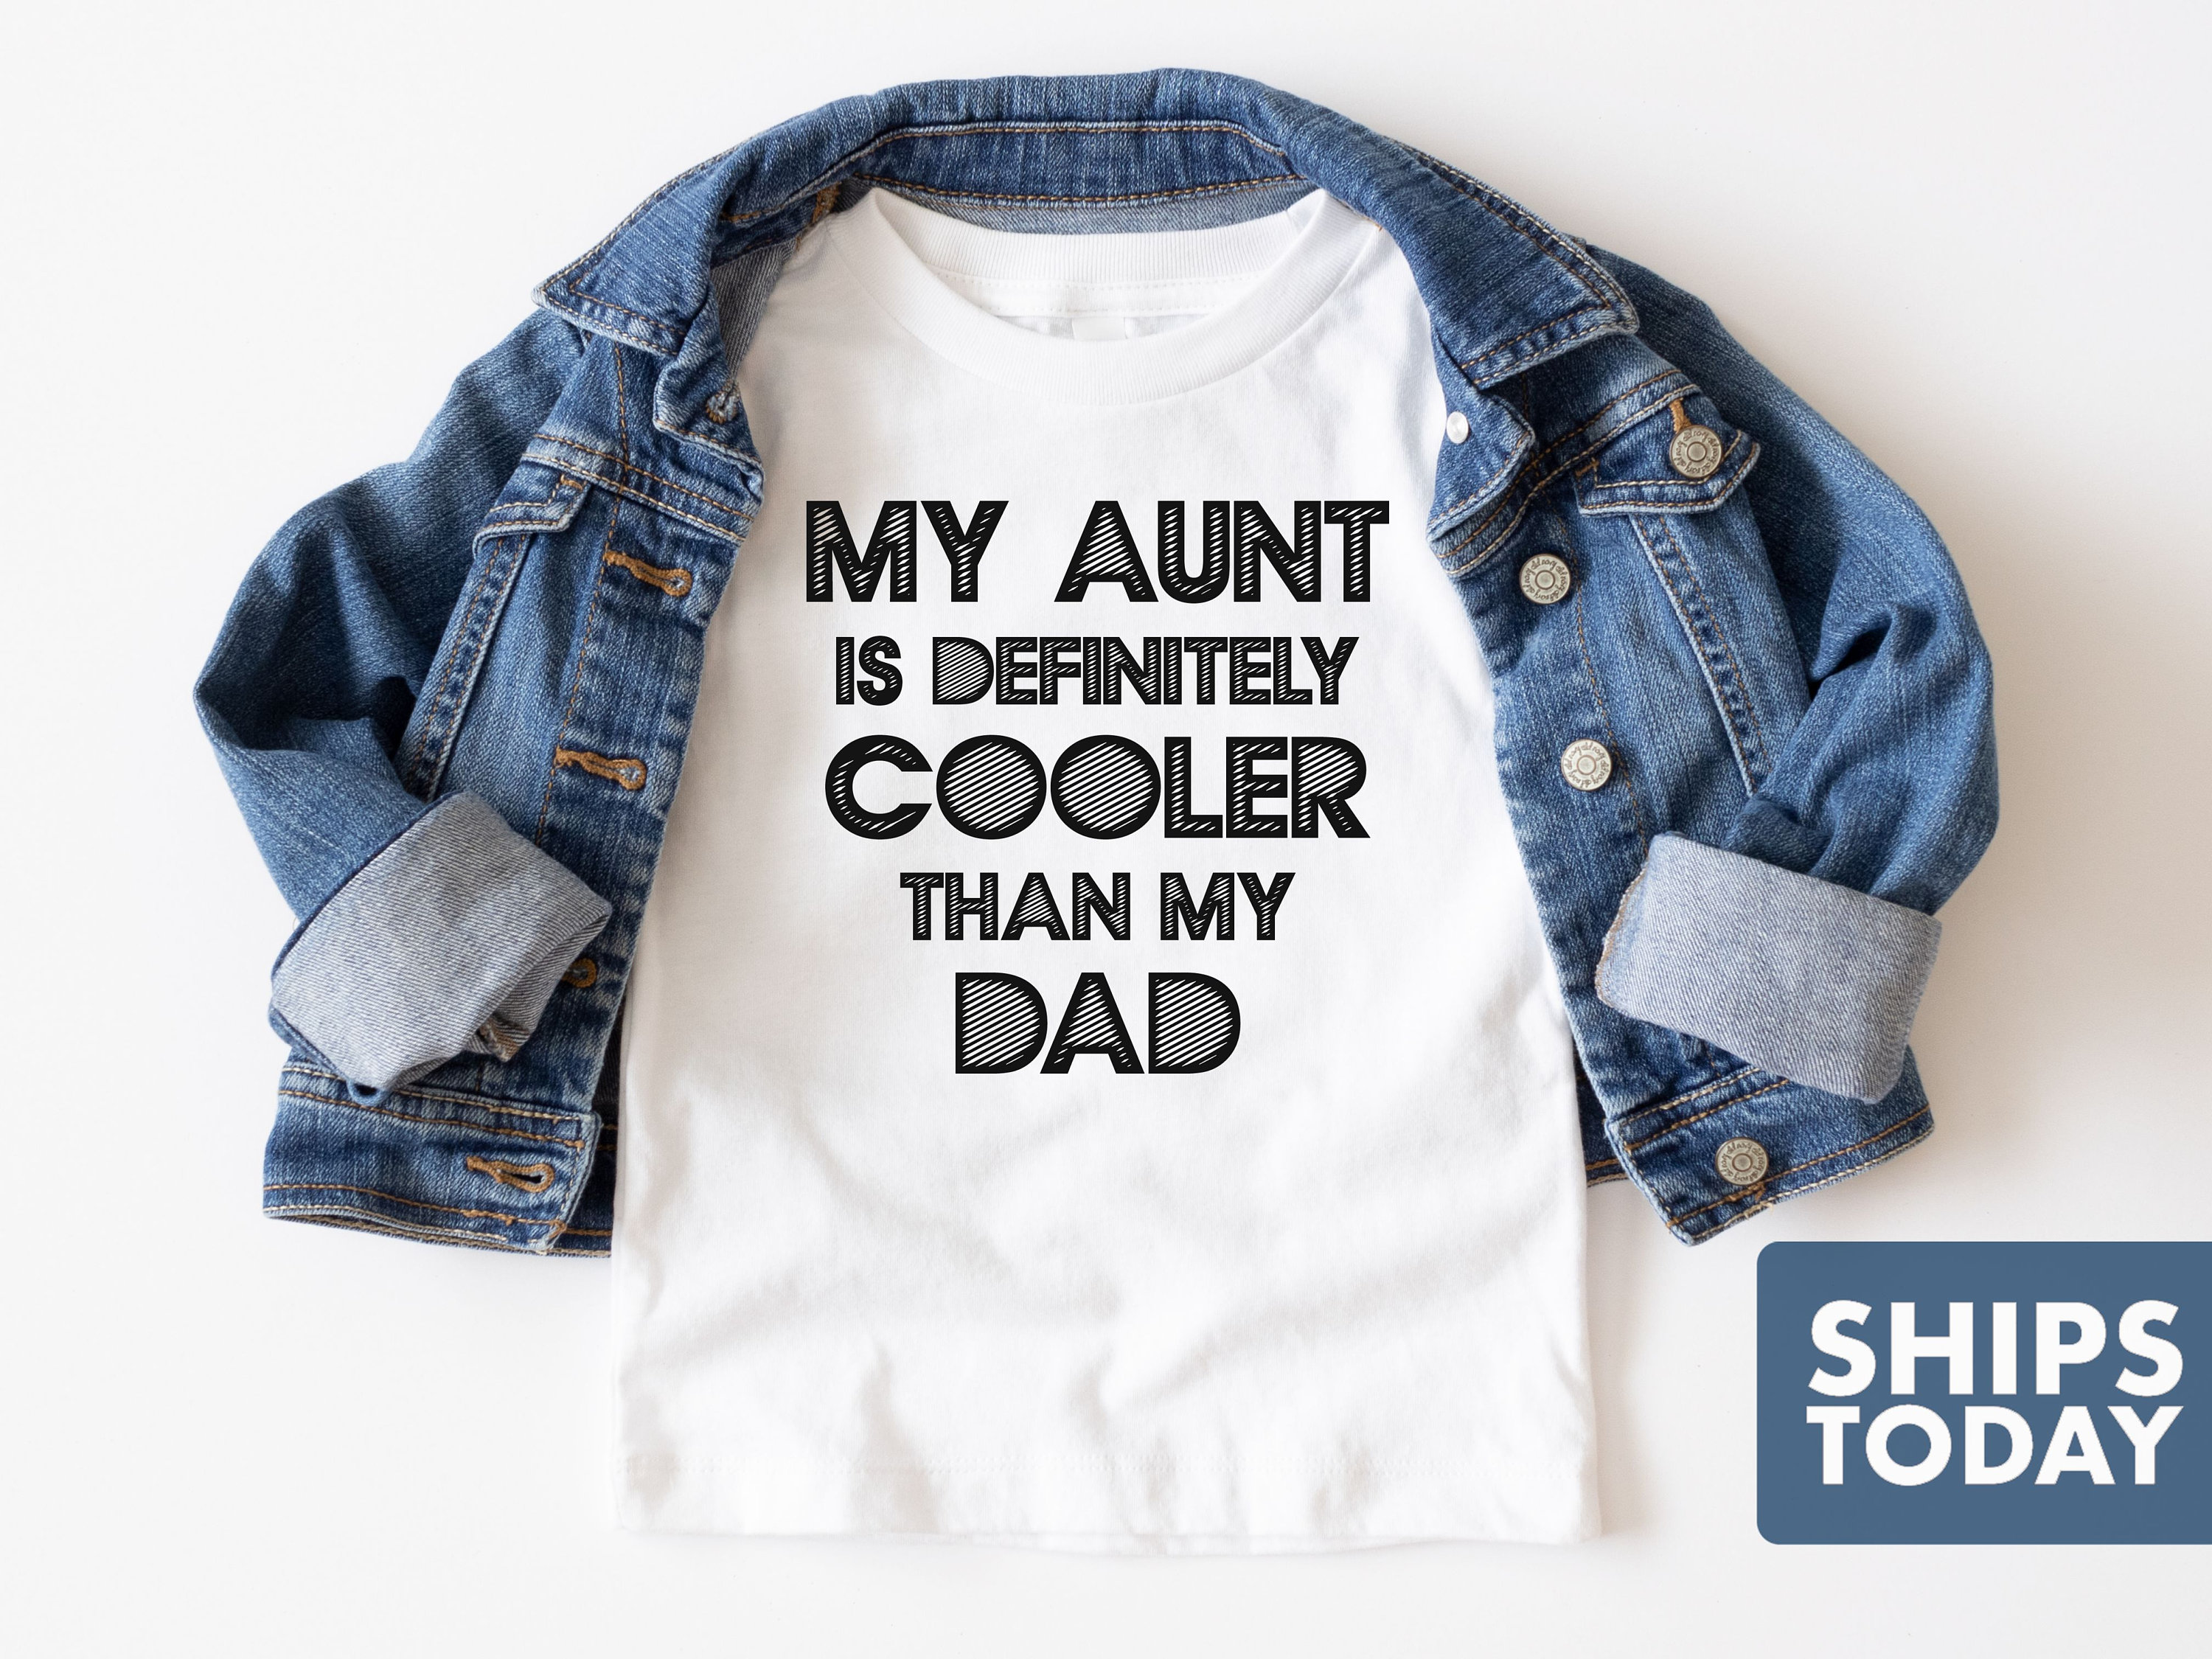 Kleding Unisex kinderkleding Tops & T-shirts T-shirts T-shirts met print Don't Make Me Call My Auntie Baby Peuter Kids T-shirt Tee Gift Van Tante Nieuwe Baby Familielid Neefje 